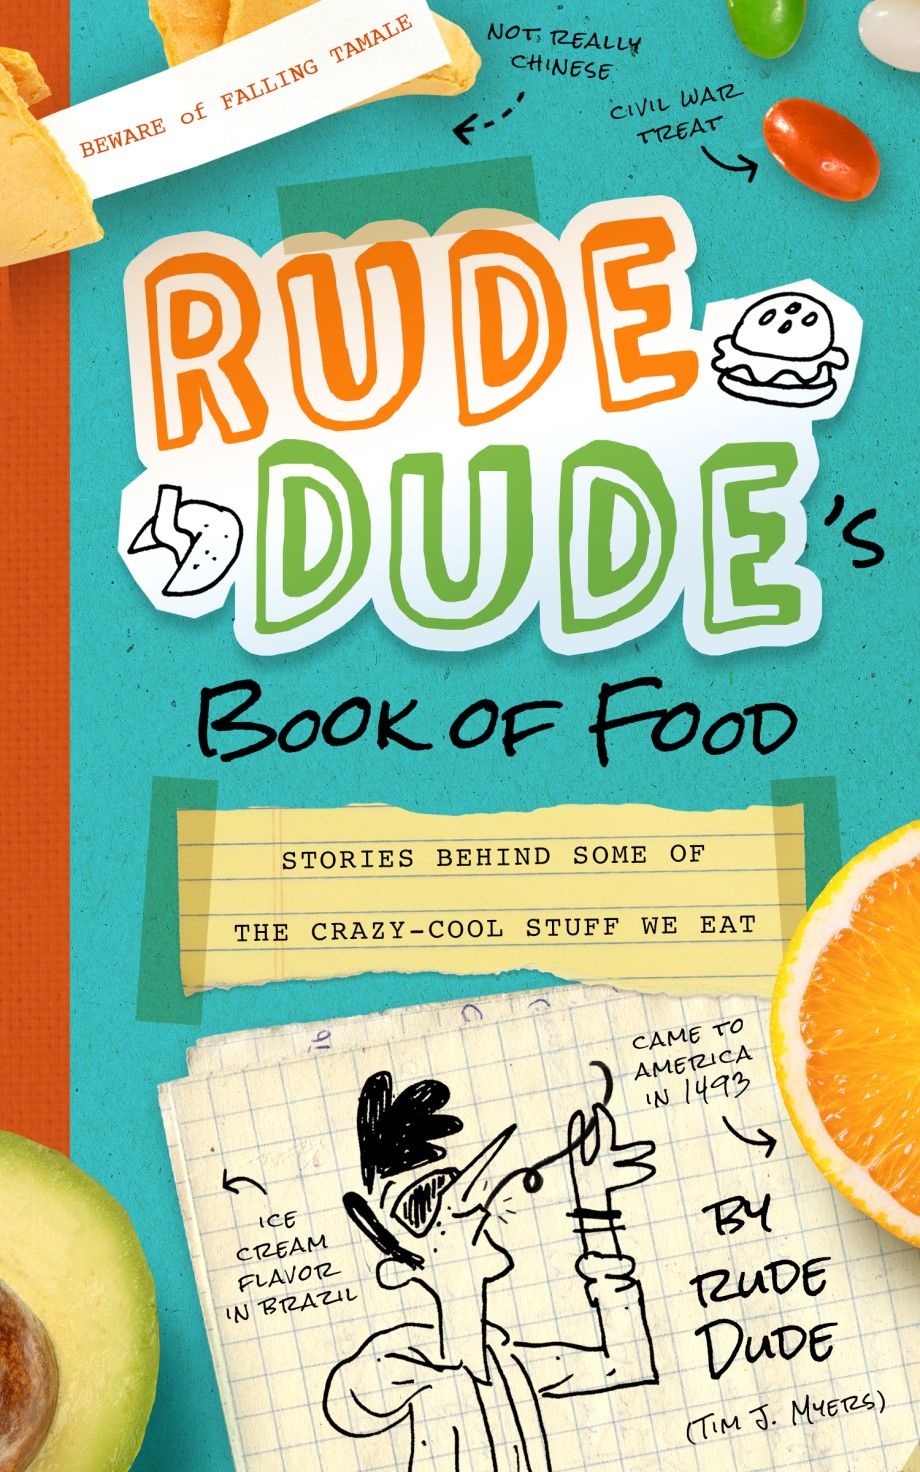 Rude Dude's Book of Food Stories Behind Some of the Crazy-Cool Stuff We Eat